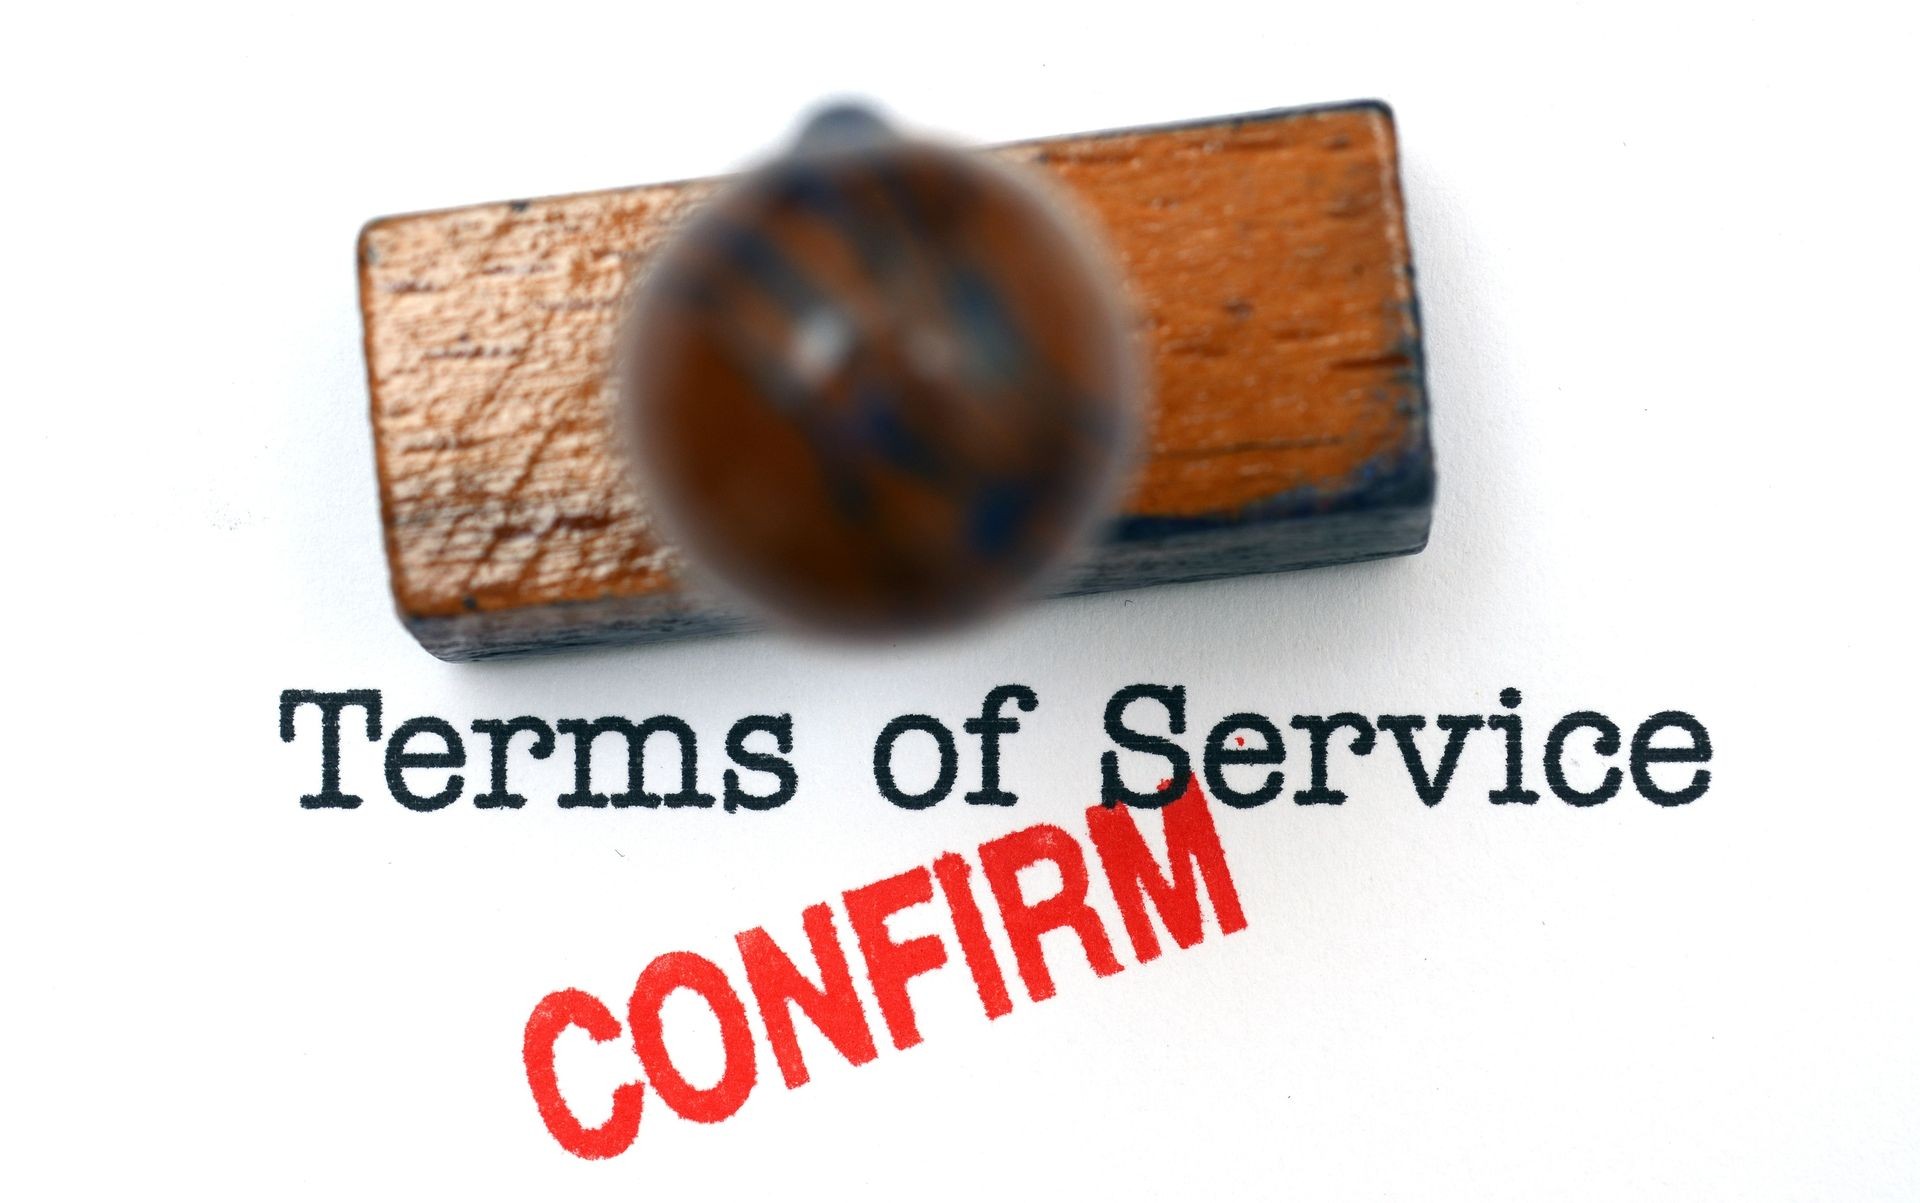 Terms of service - confirm